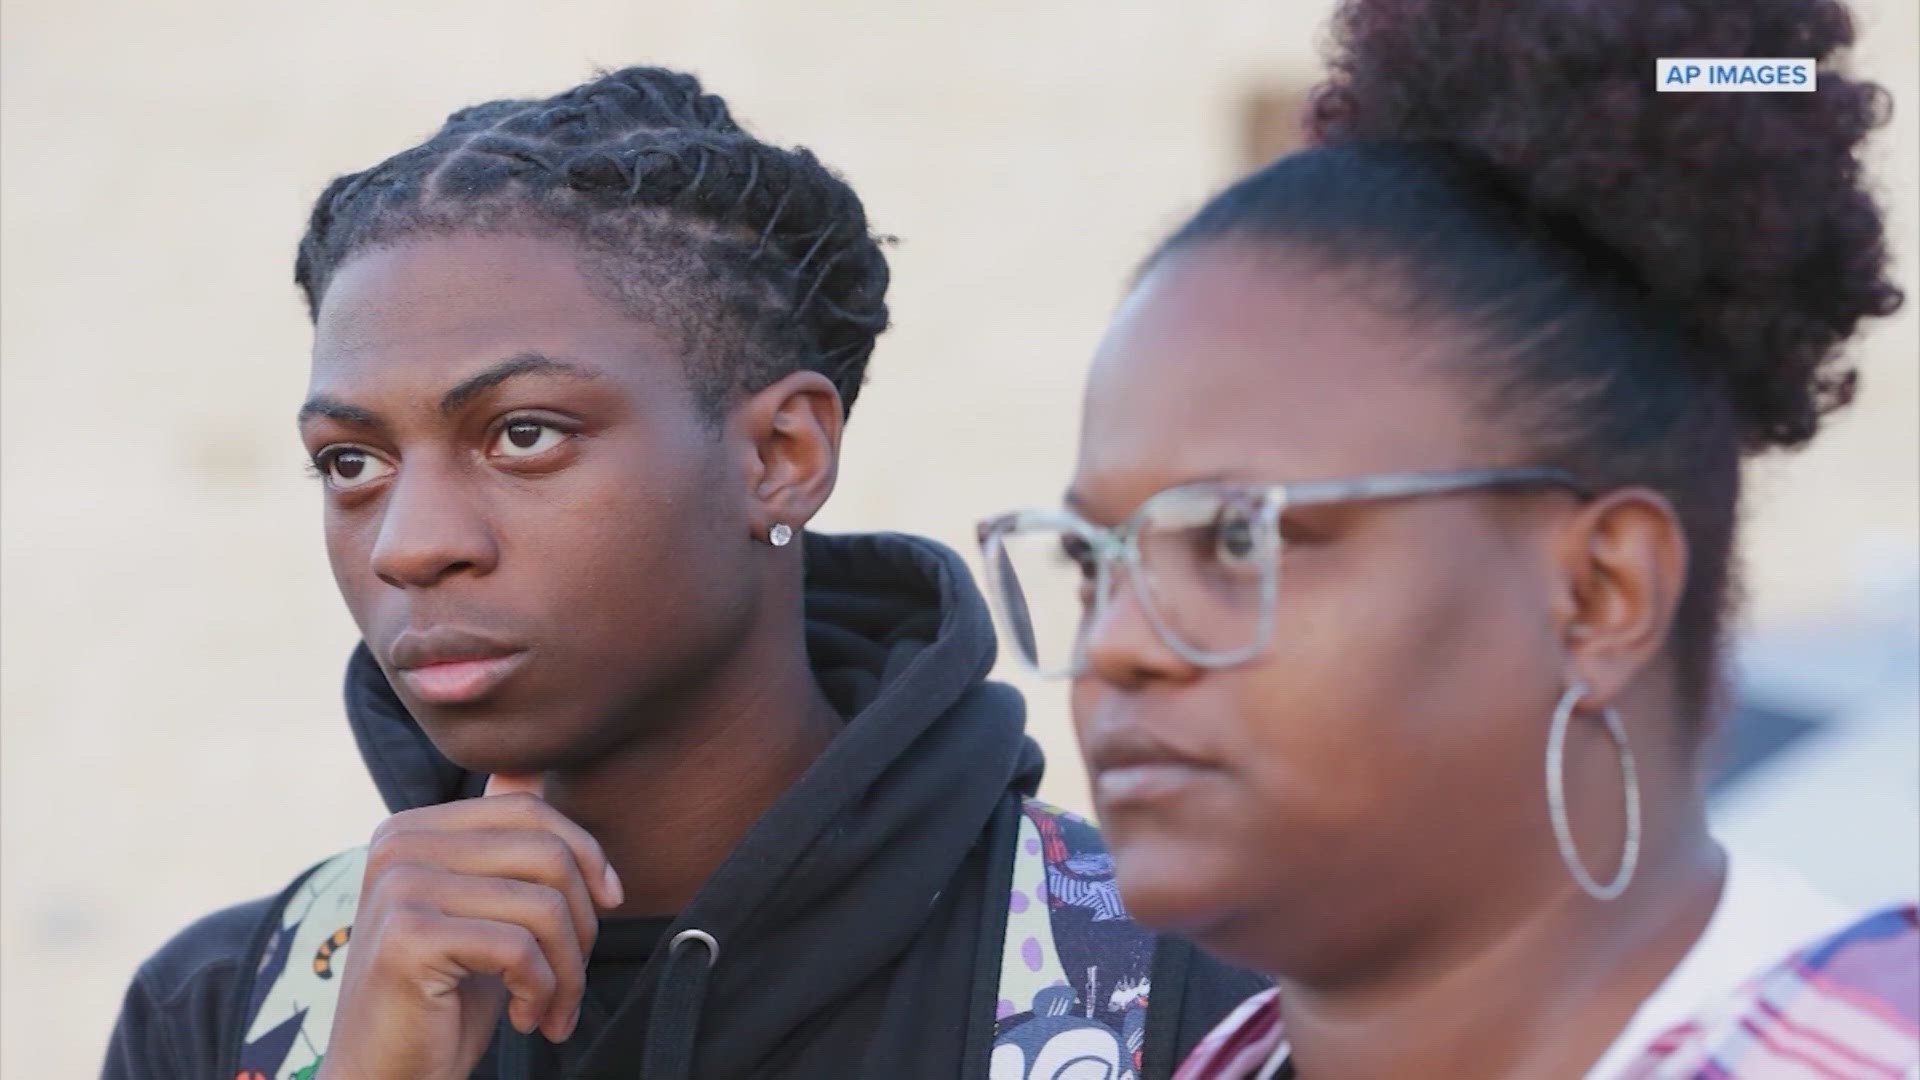 Darryl George is the 18-year-old Barbers Hills High School student at the center of the controversy. His family argues the district violated Texas' CROWN Act.